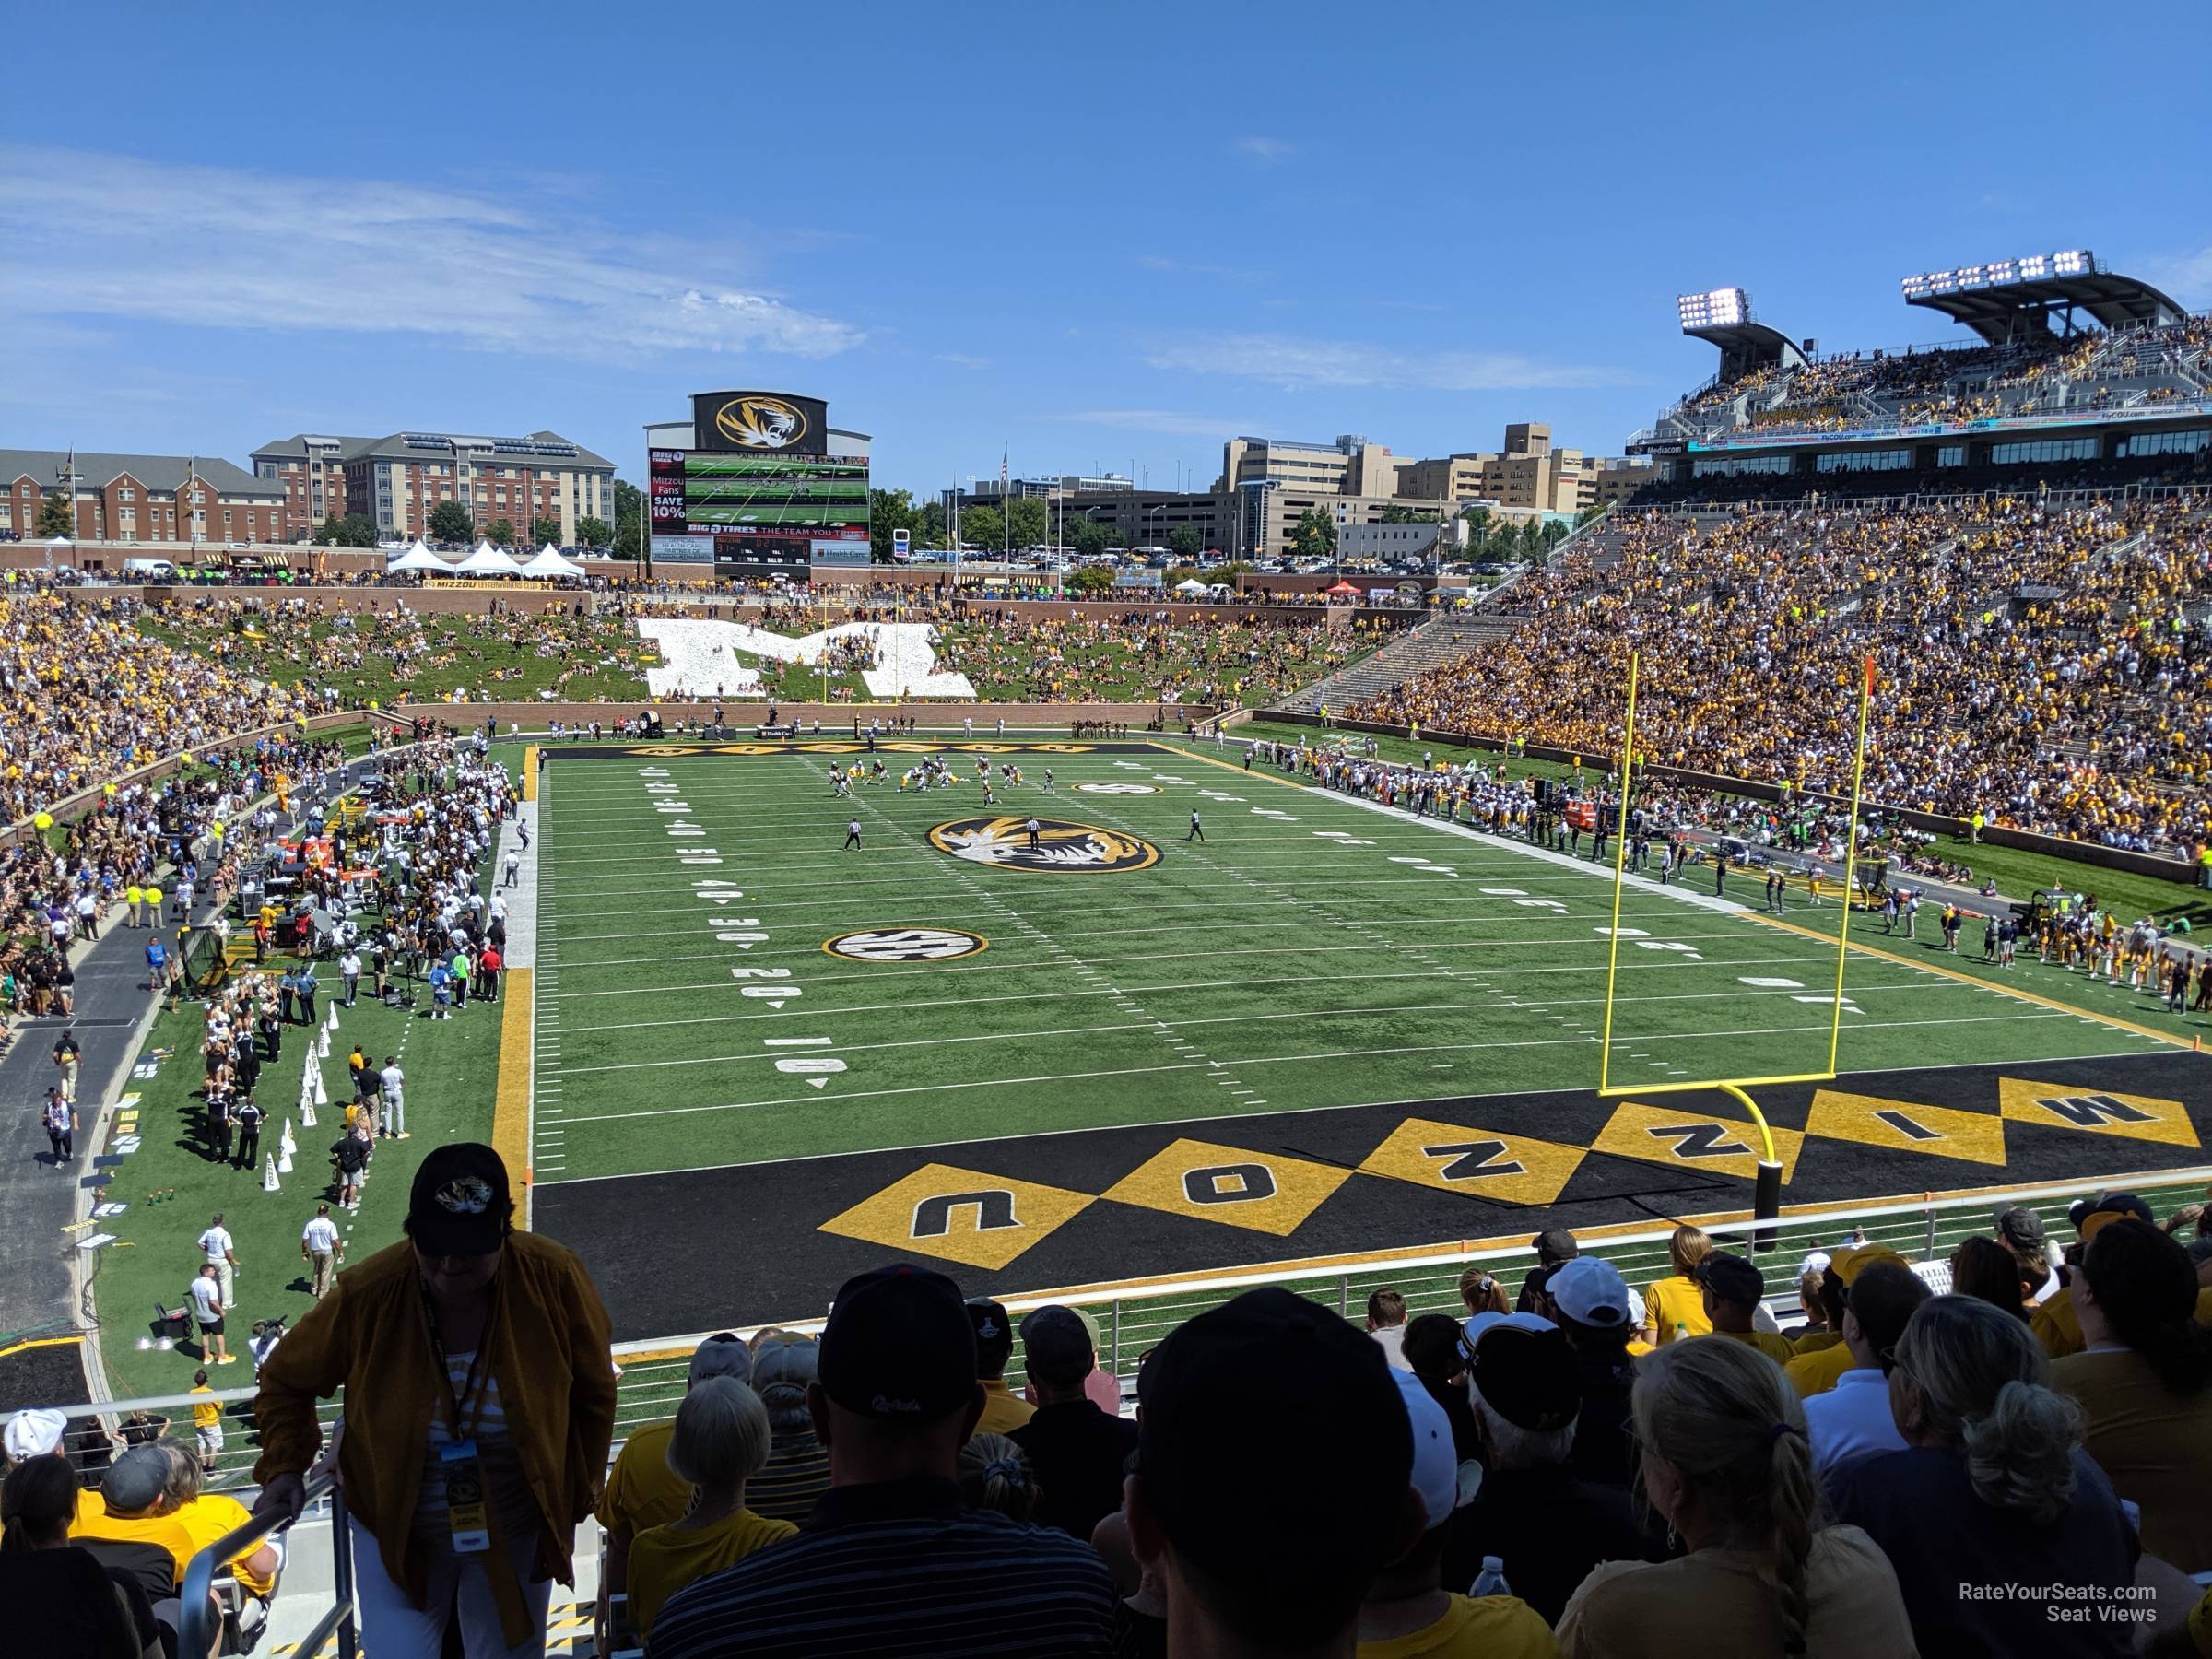 section 128 seat view  - faurot field